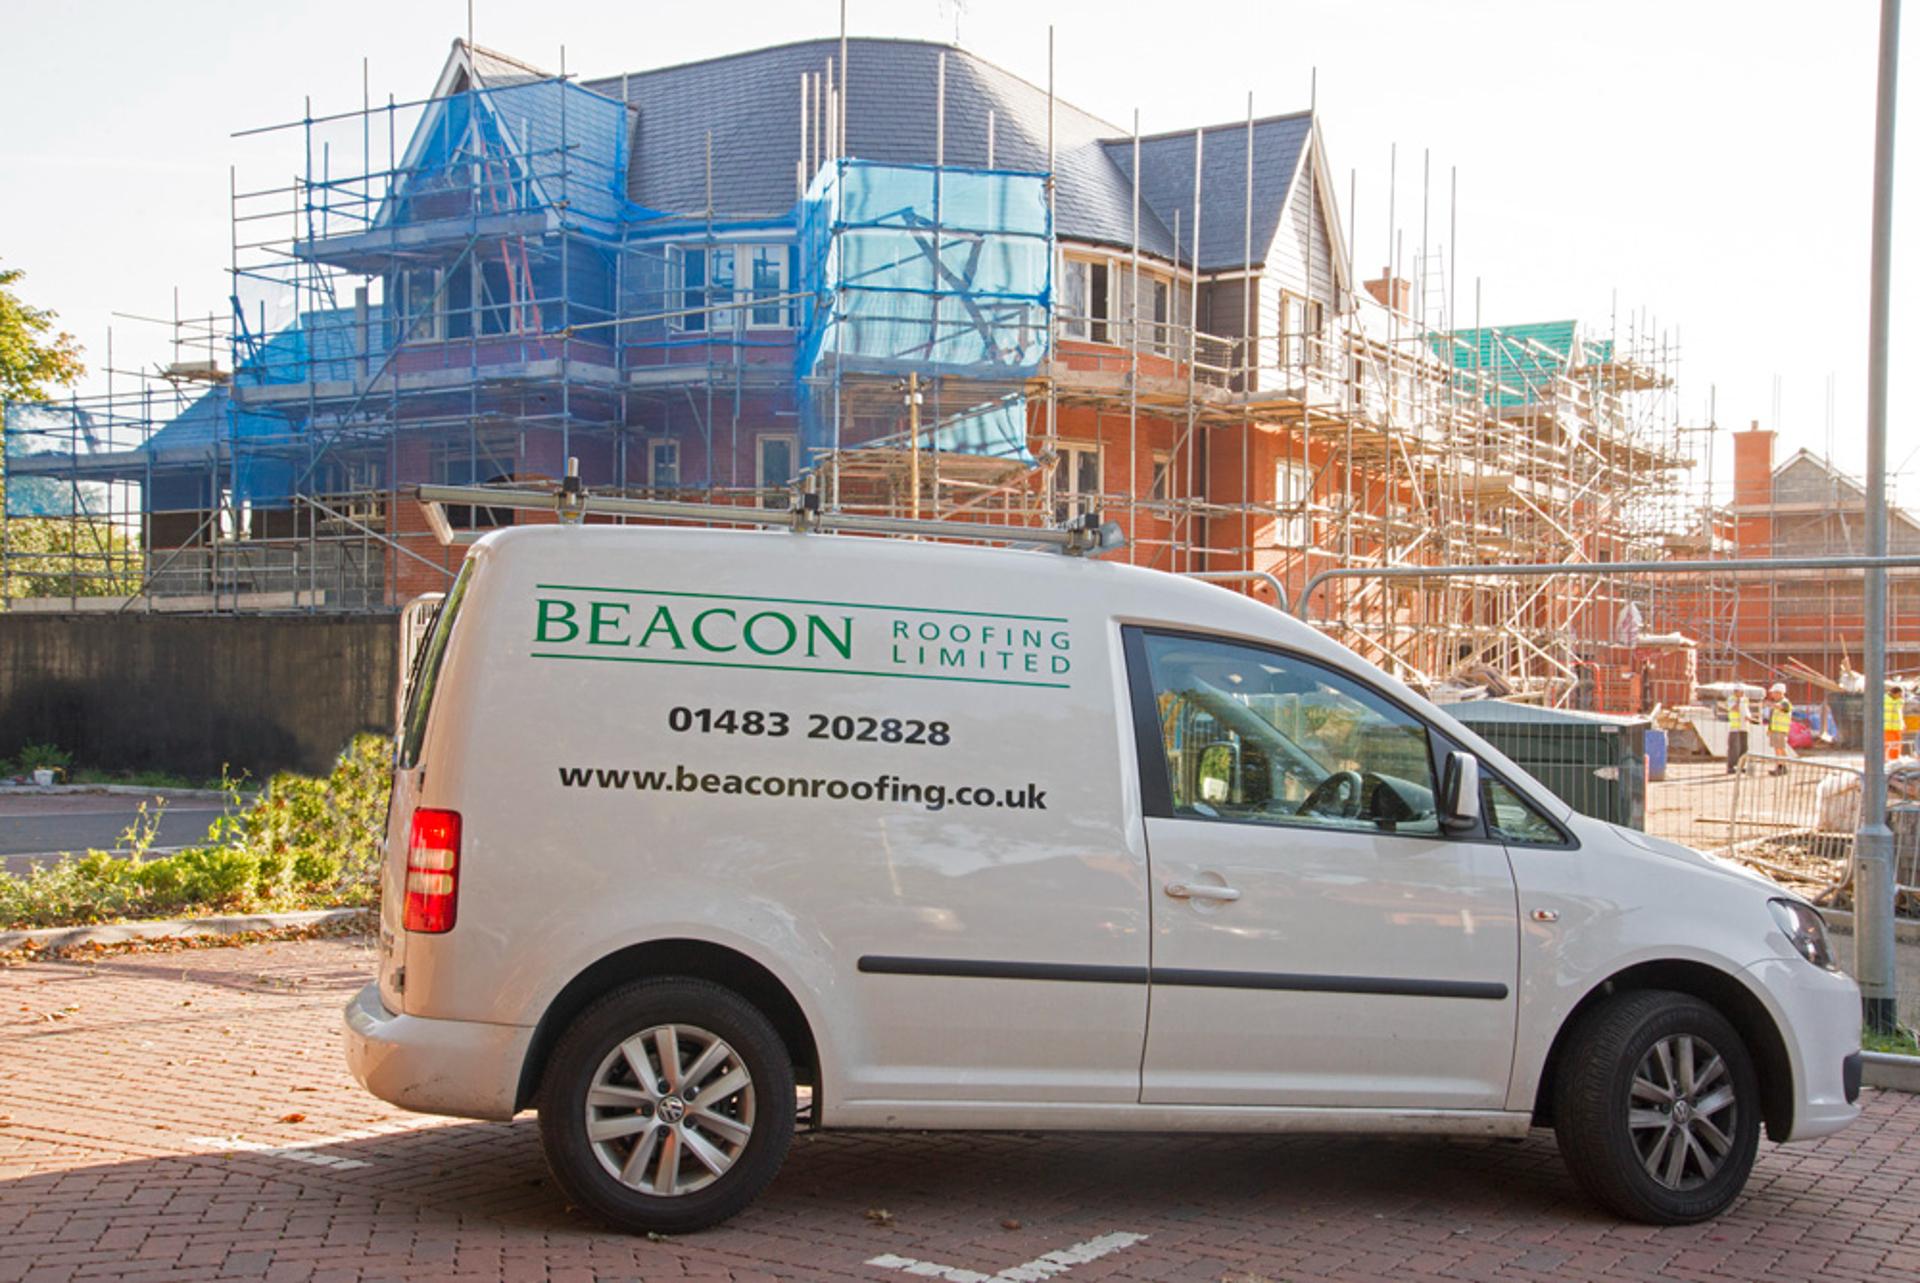 Beacon Roofing acquired by Brickability at around 6x EBITDA